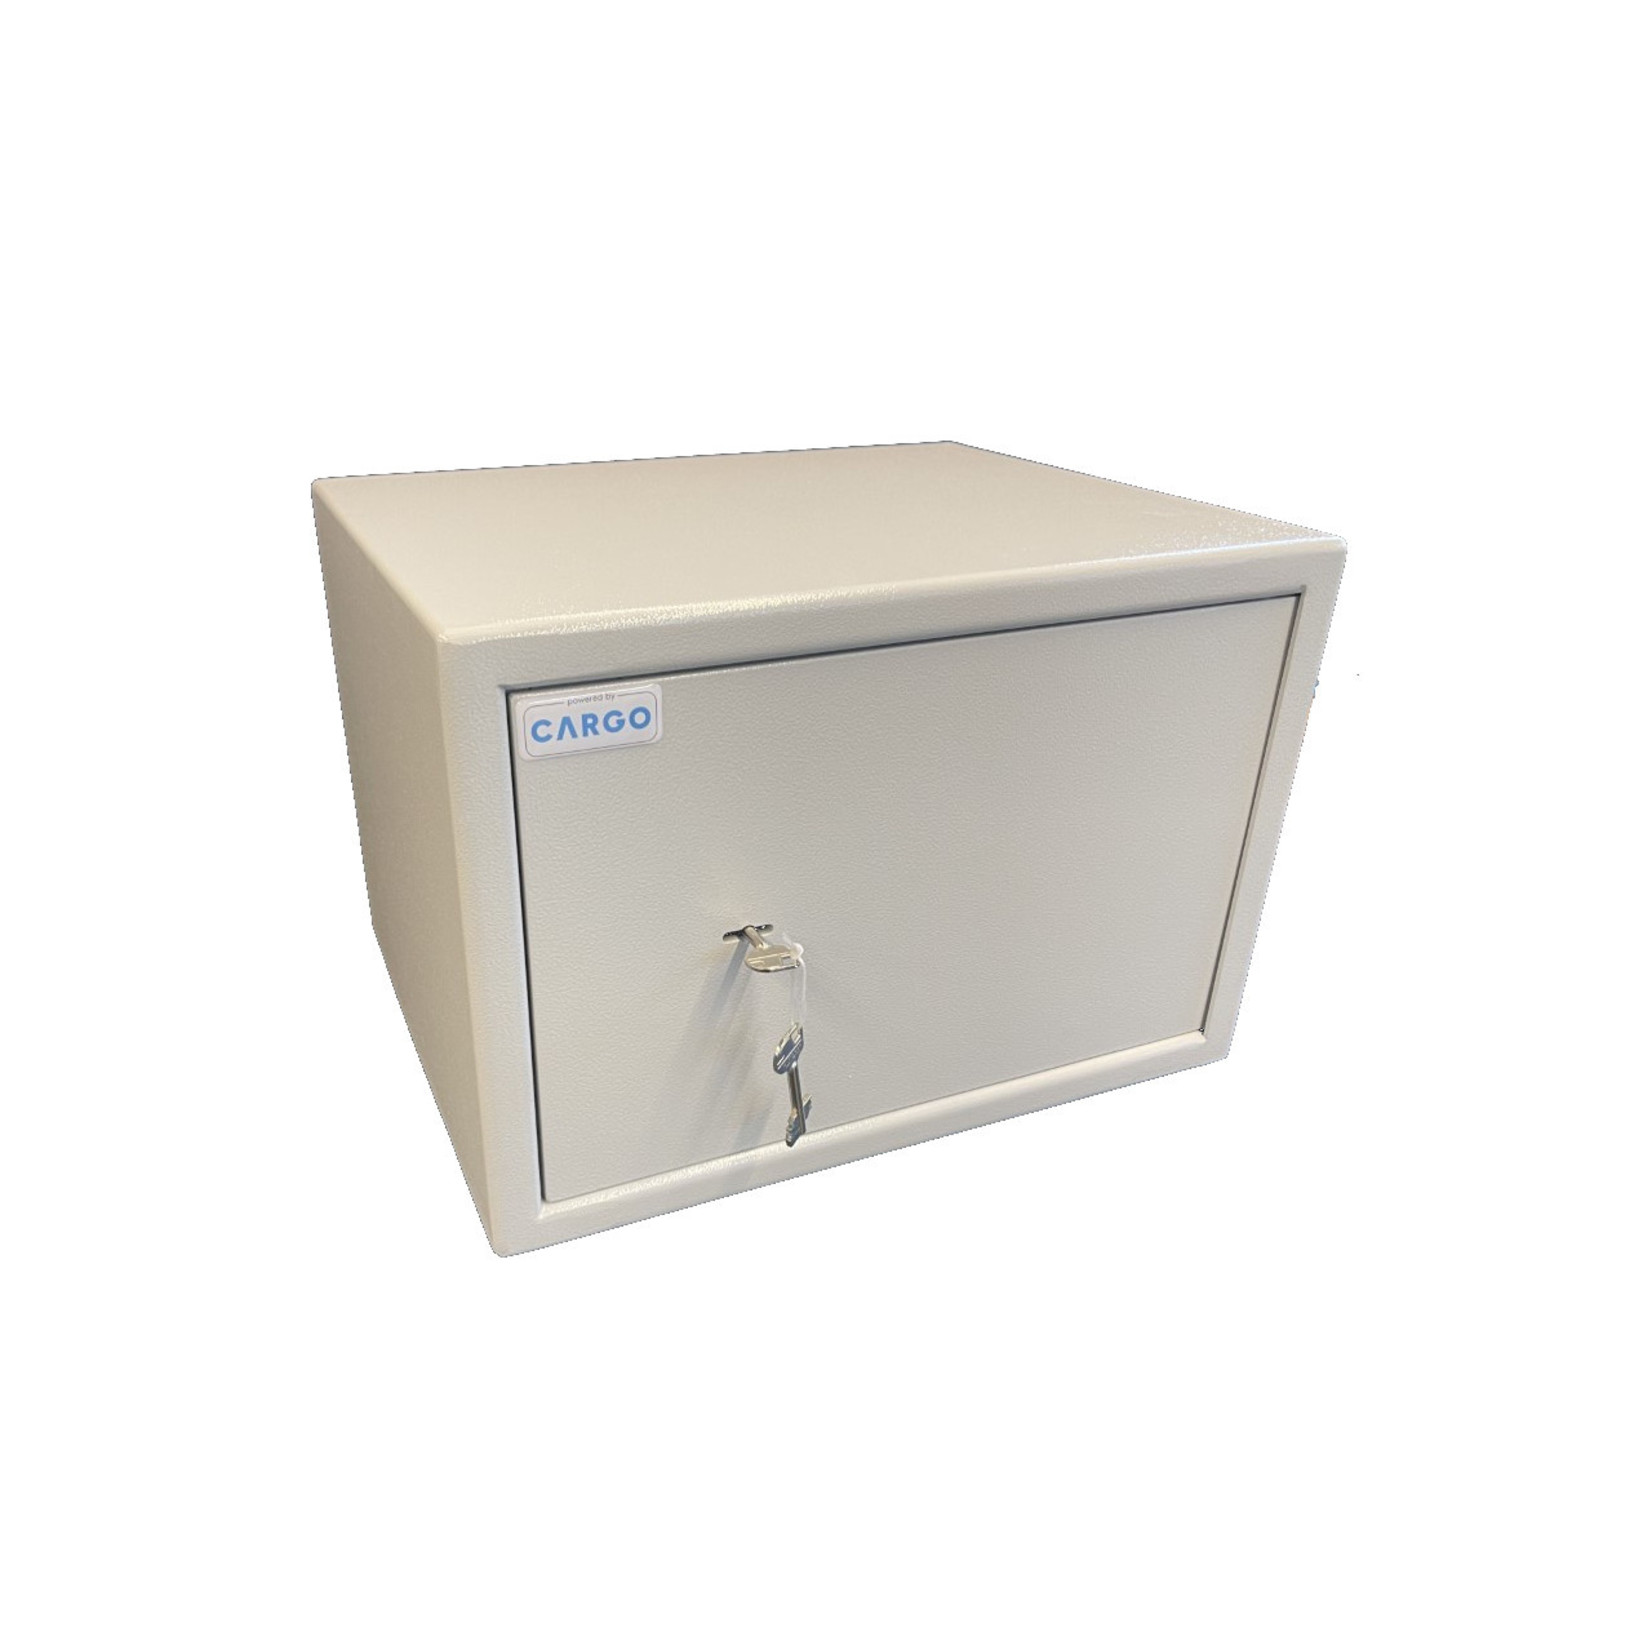 RDW approved safe - Small